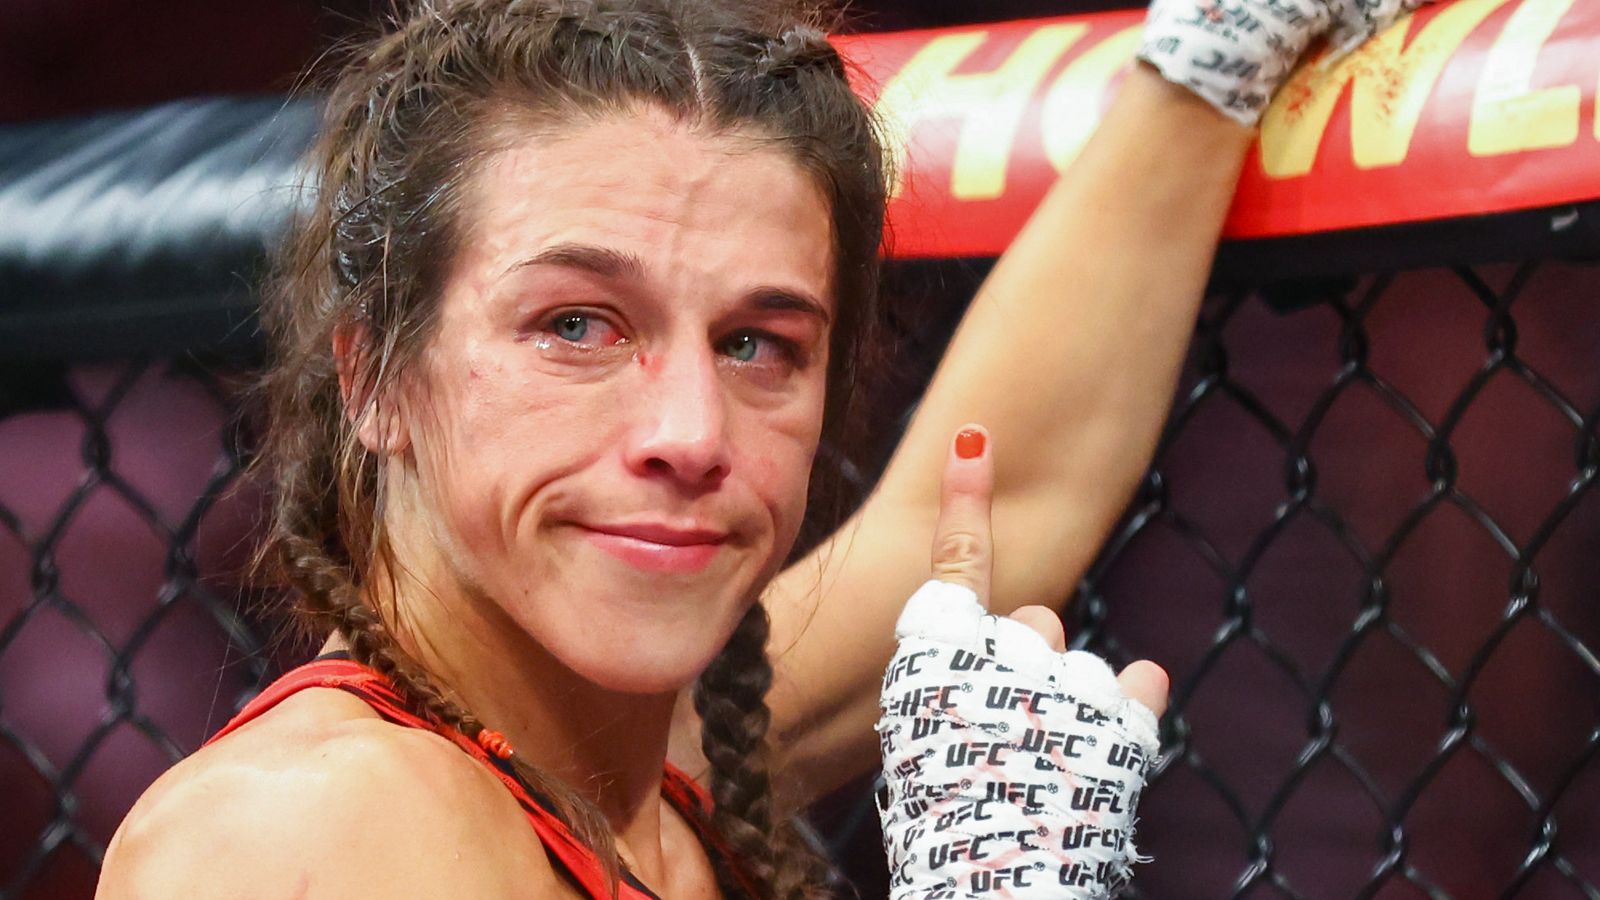 joanna-jedrzejczyk-former-strawweight-champion-announces-retirement-after-losing-her-rematch-with-zhang-weili